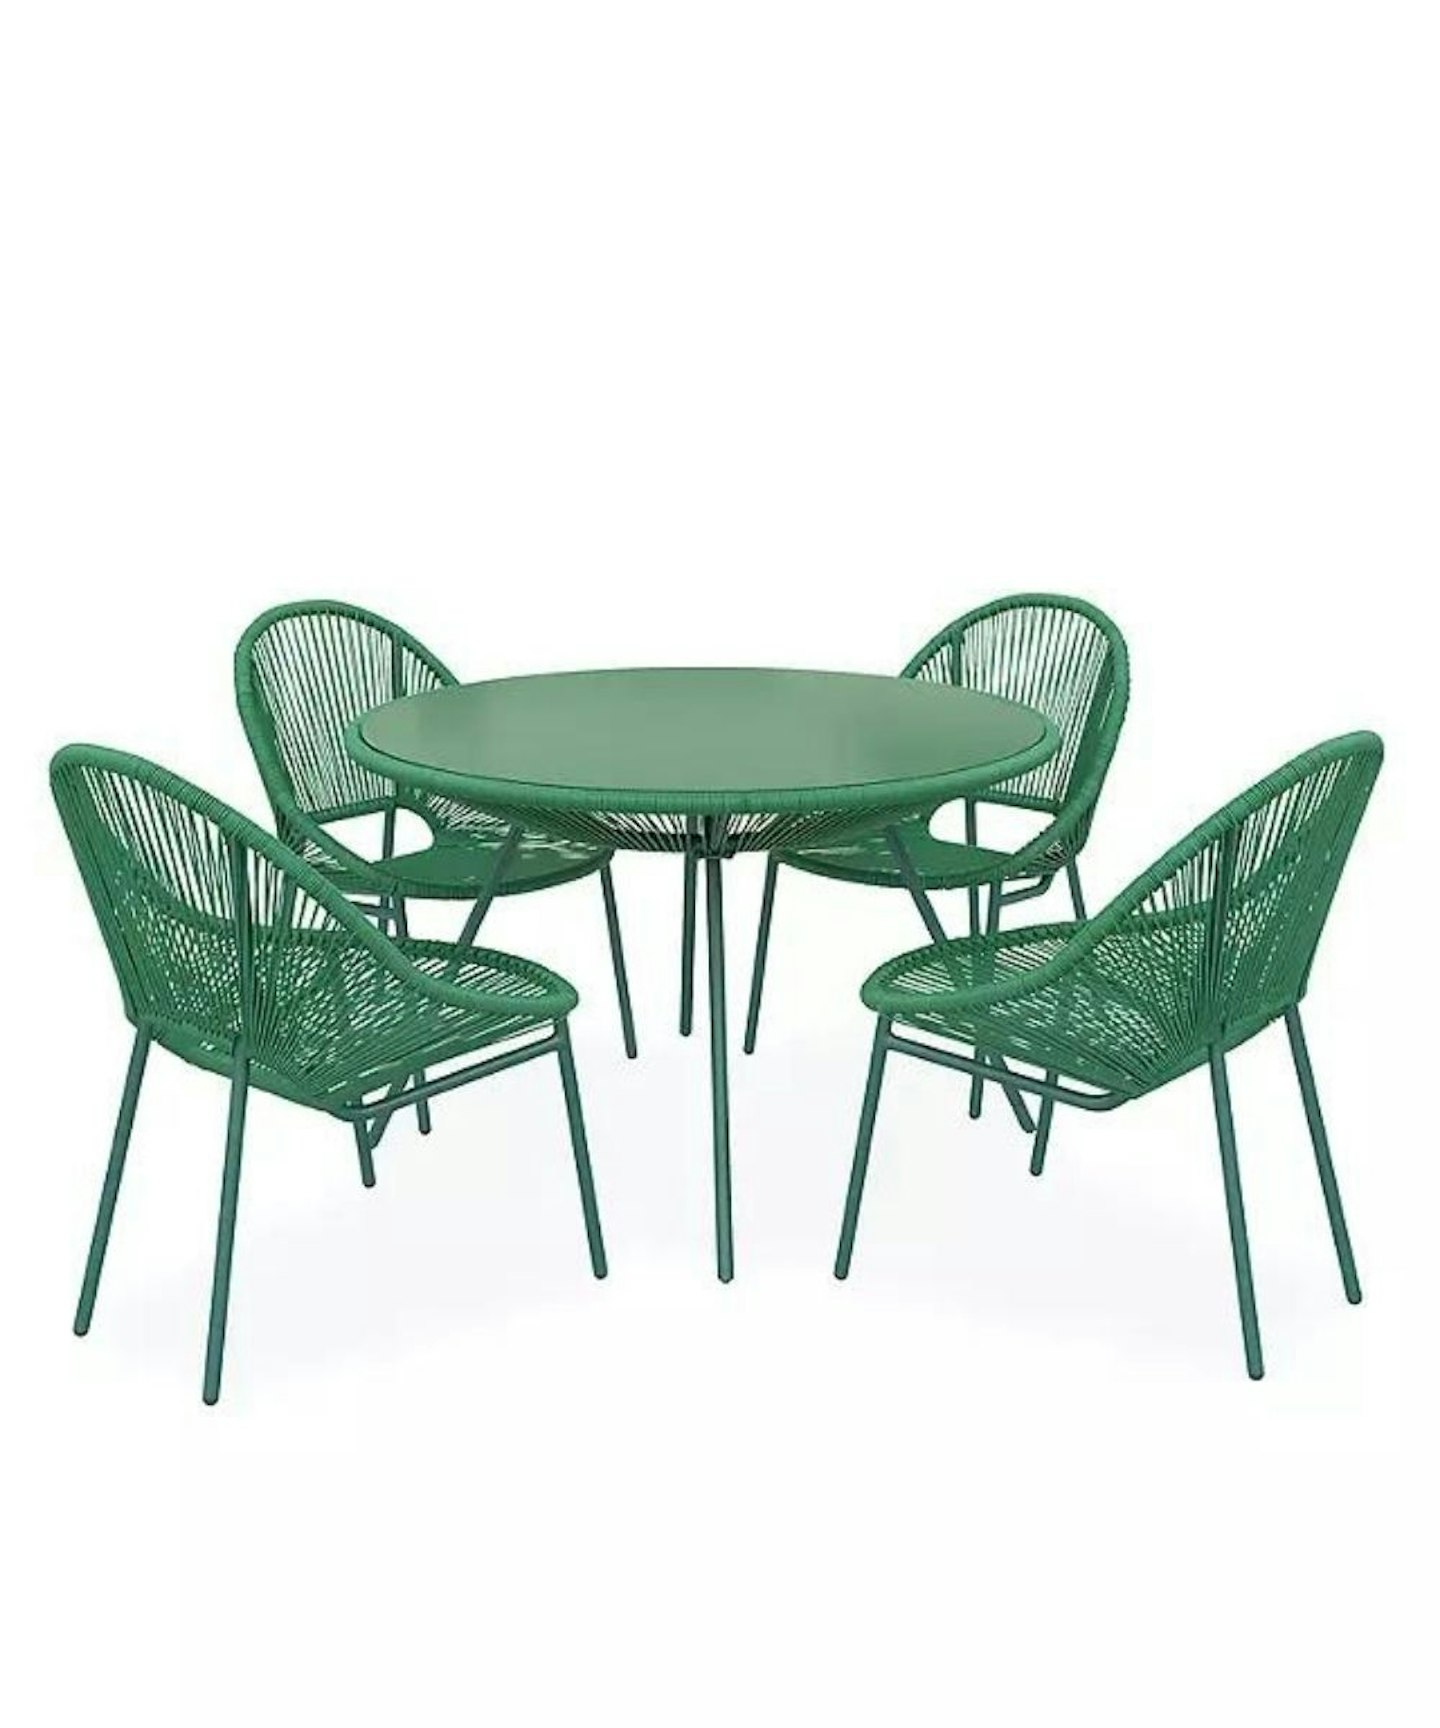 John Lewis & Partners Salsa Four-Seater Round Garden Dining Table & Chairs Set, £469